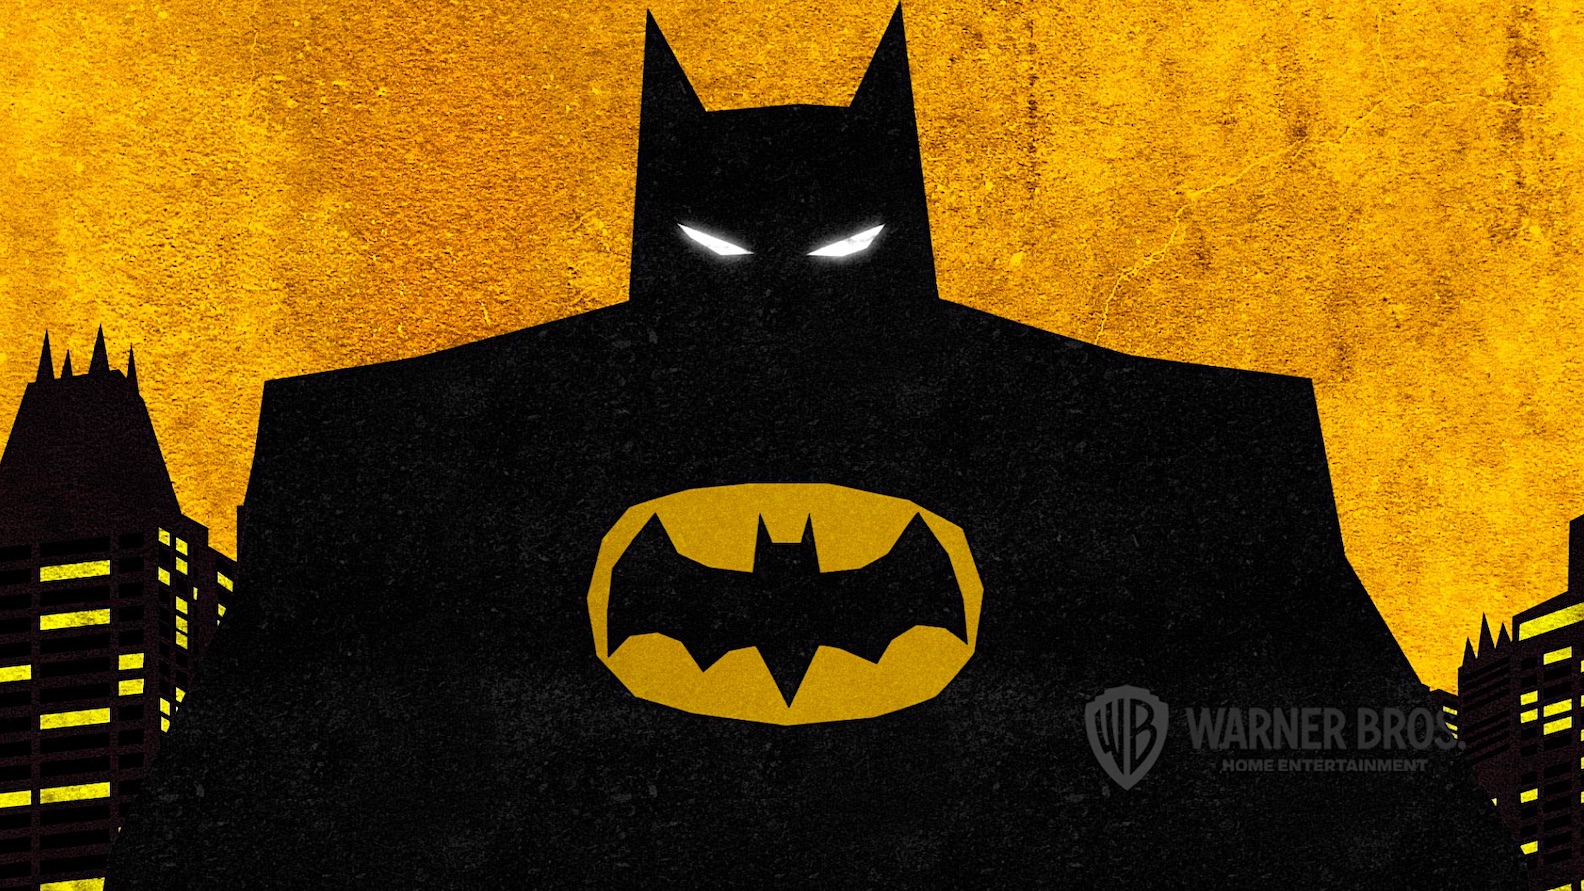 Writers Can Now Be Hired For Projects Such As Batman: Brave and the Bold